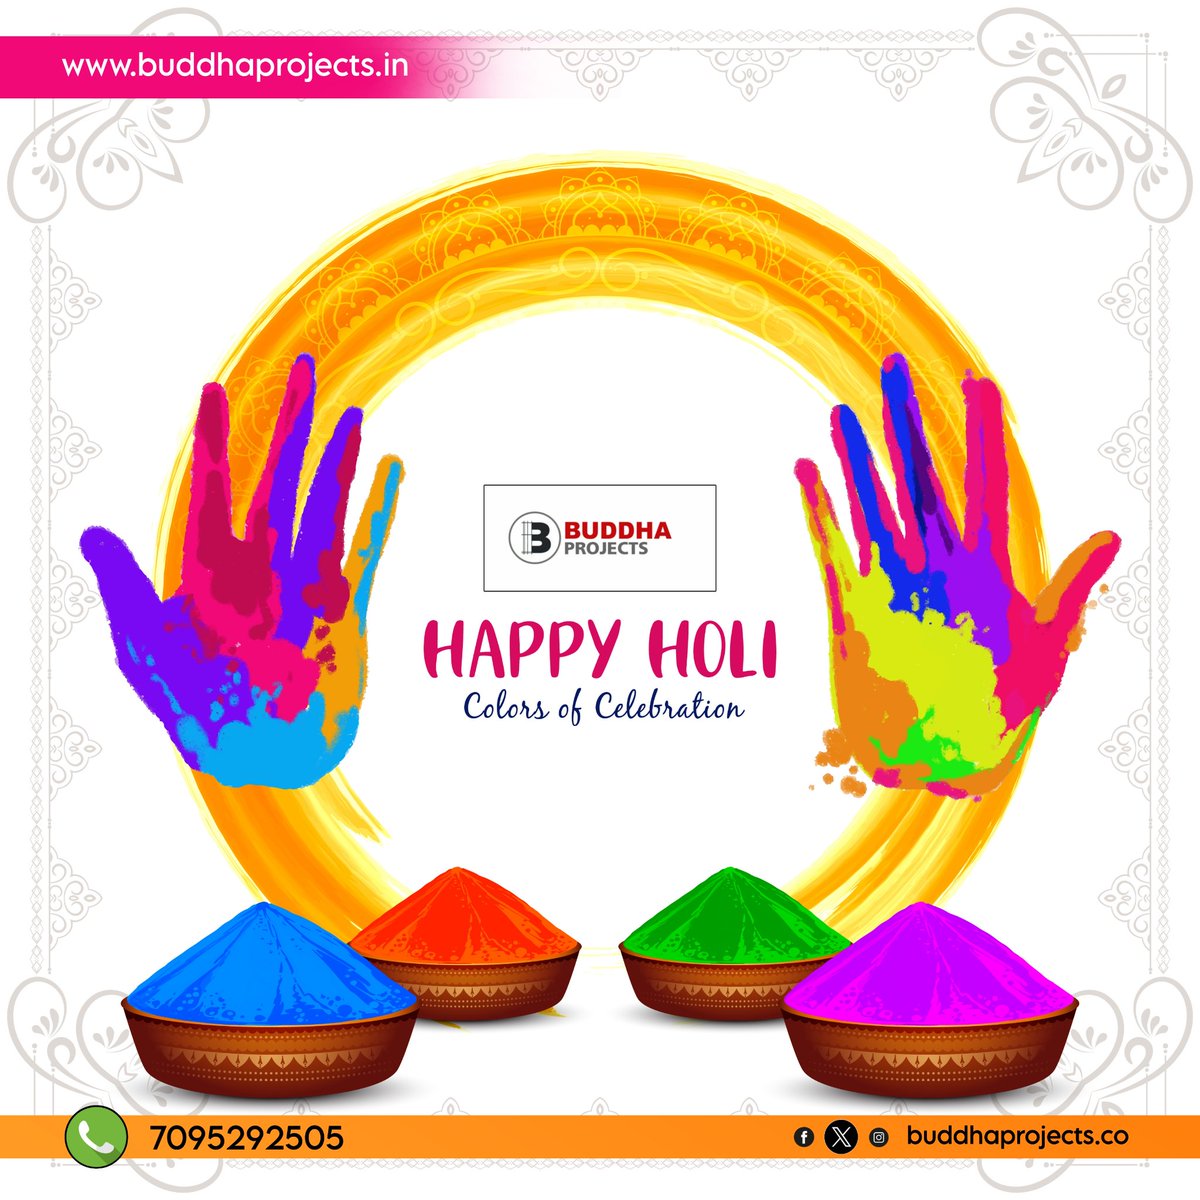 #HappyHoli #Holi2024 #buddhaprojects #rajagowtham #Hyderabad #structuraldesigns #constr